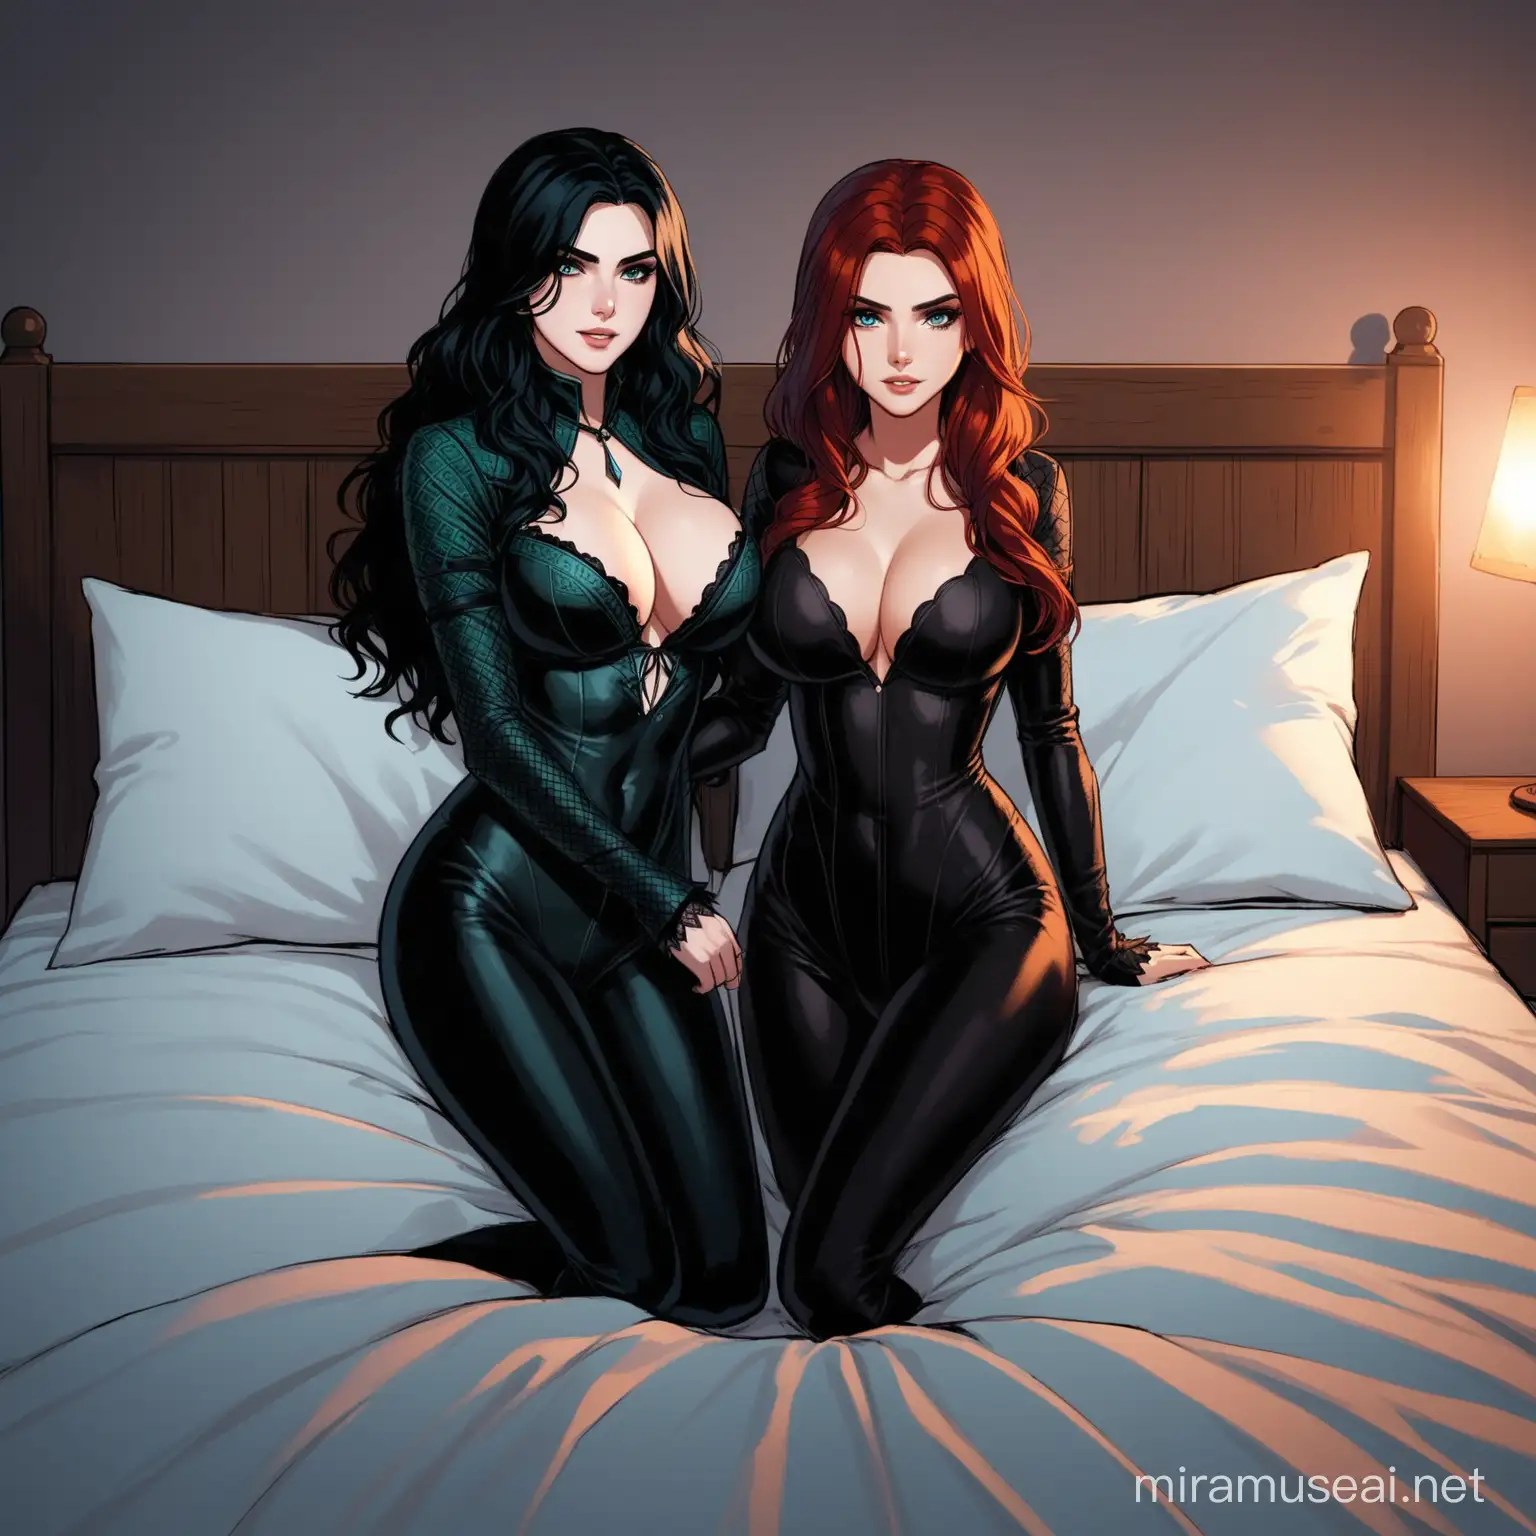 Yennefer and Triss Merigold in Silver Catsuits on Double Bed